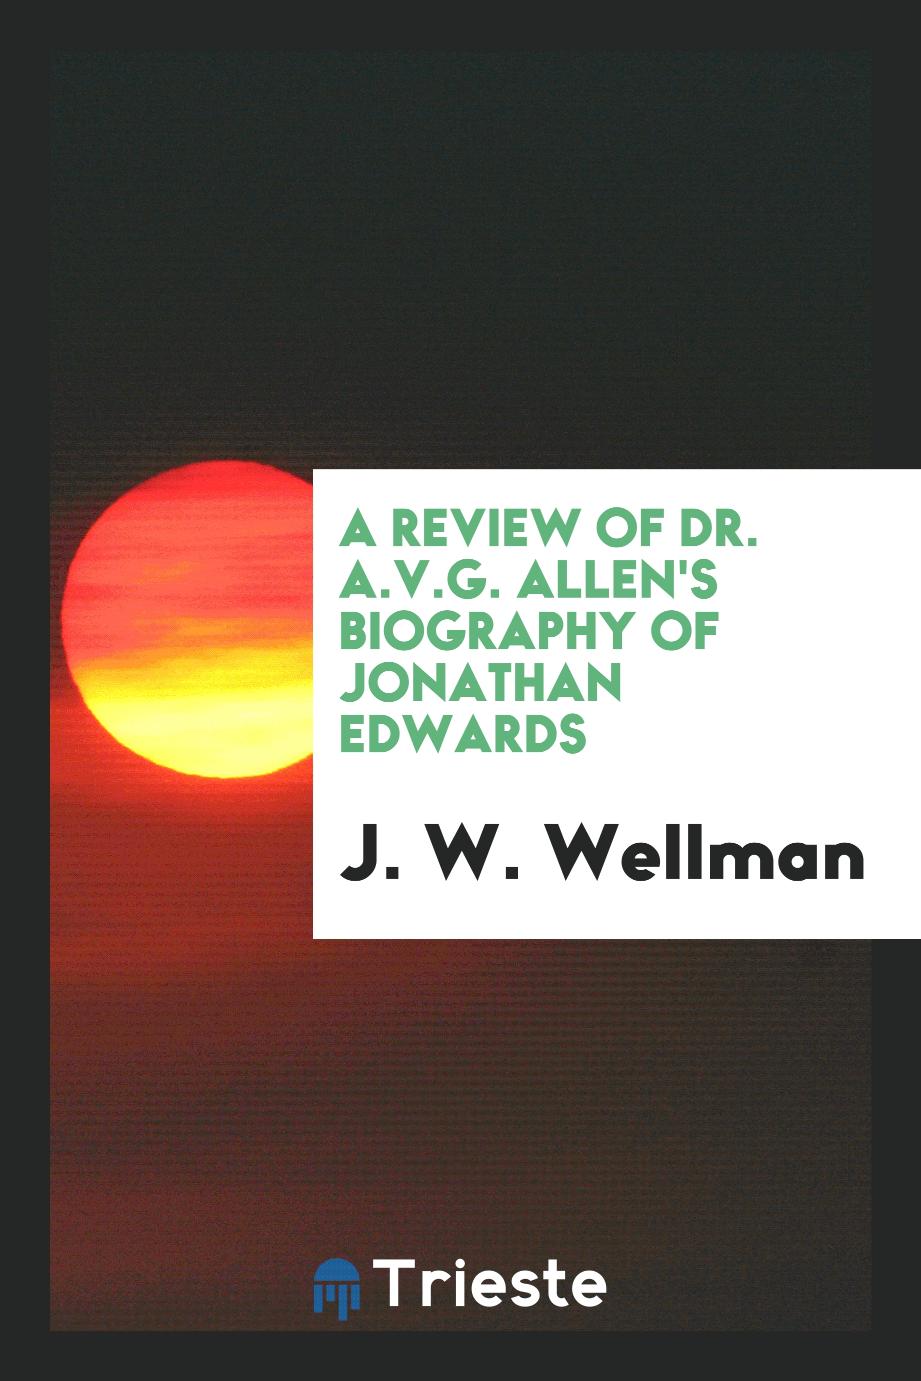 A review of Dr. A.V.G. Allen's biography of Jonathan Edwards